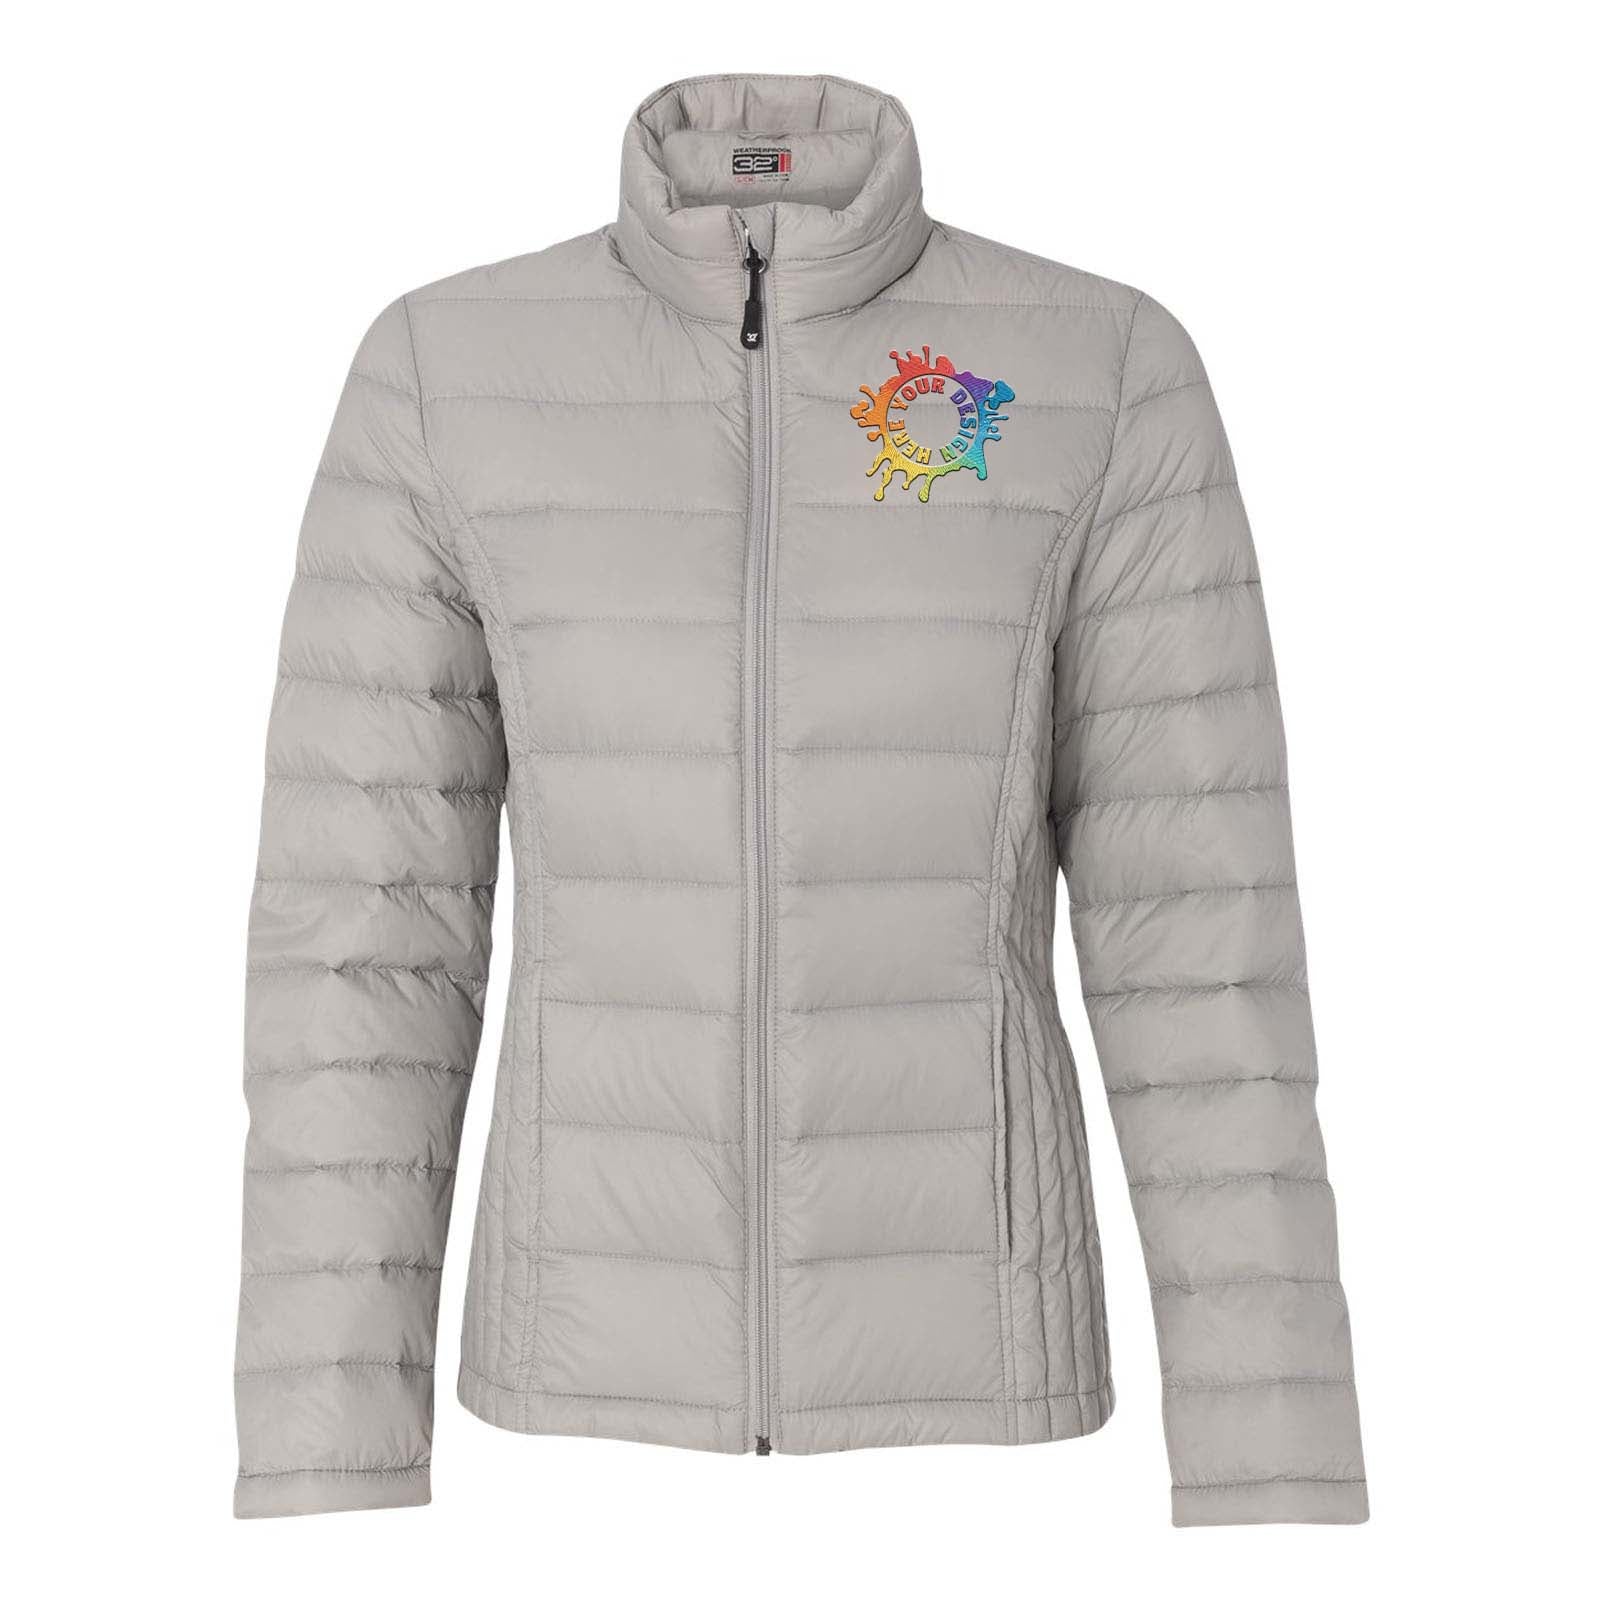 Weatherproof Women's 32 Degrees Packable Down Jacket Embroidery - Mato & Hash